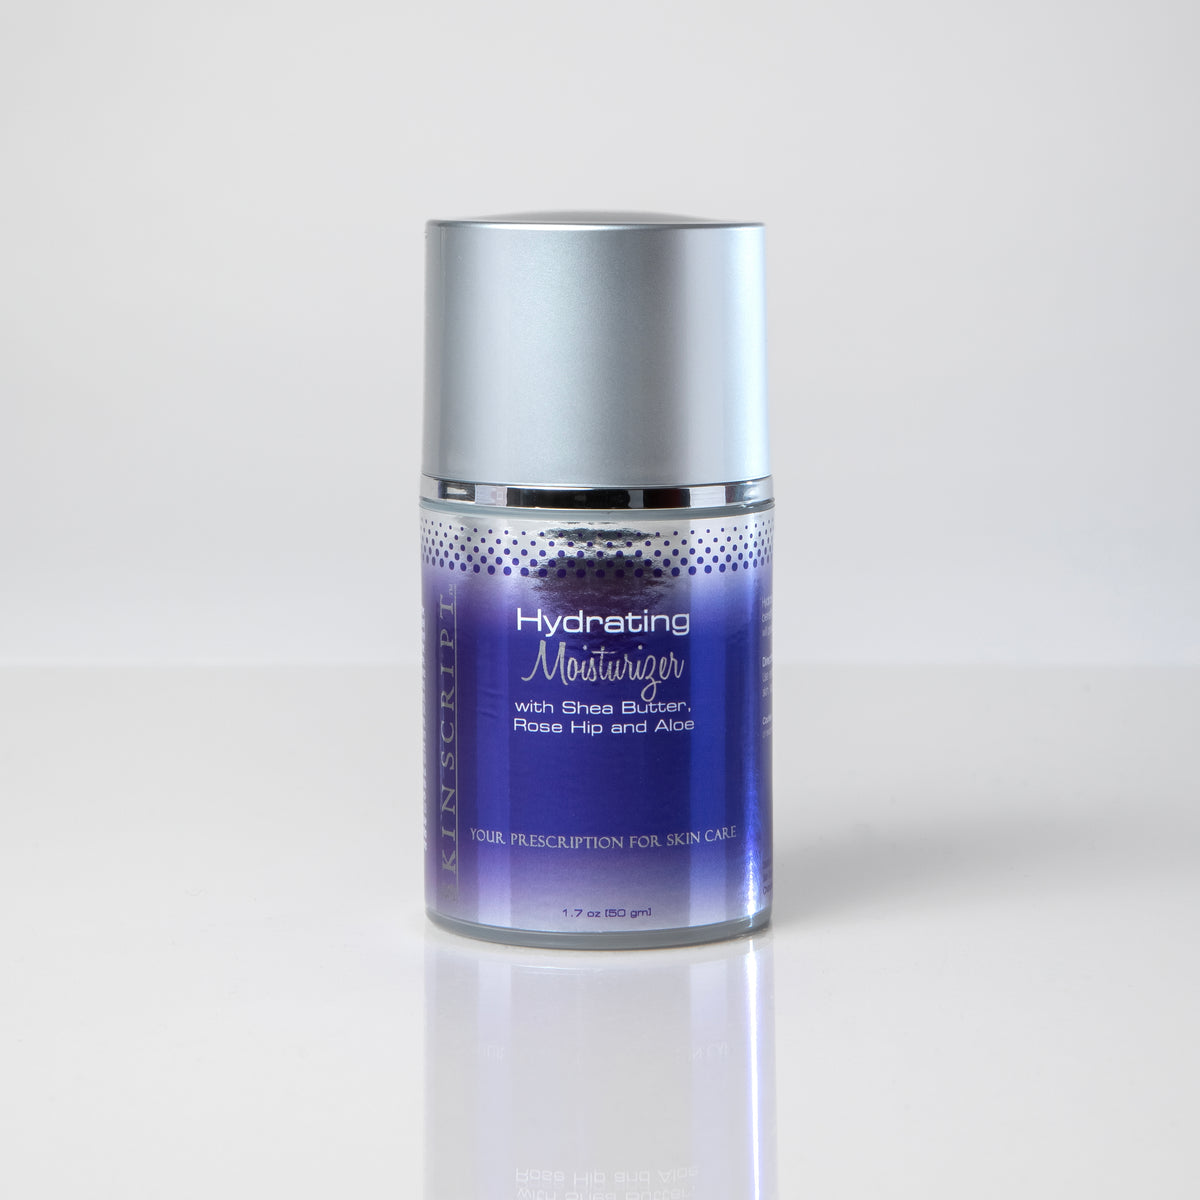 The Hydrating Moisturizer improves the appearance of wrinkles with intense hydration. 1.7 ounces 